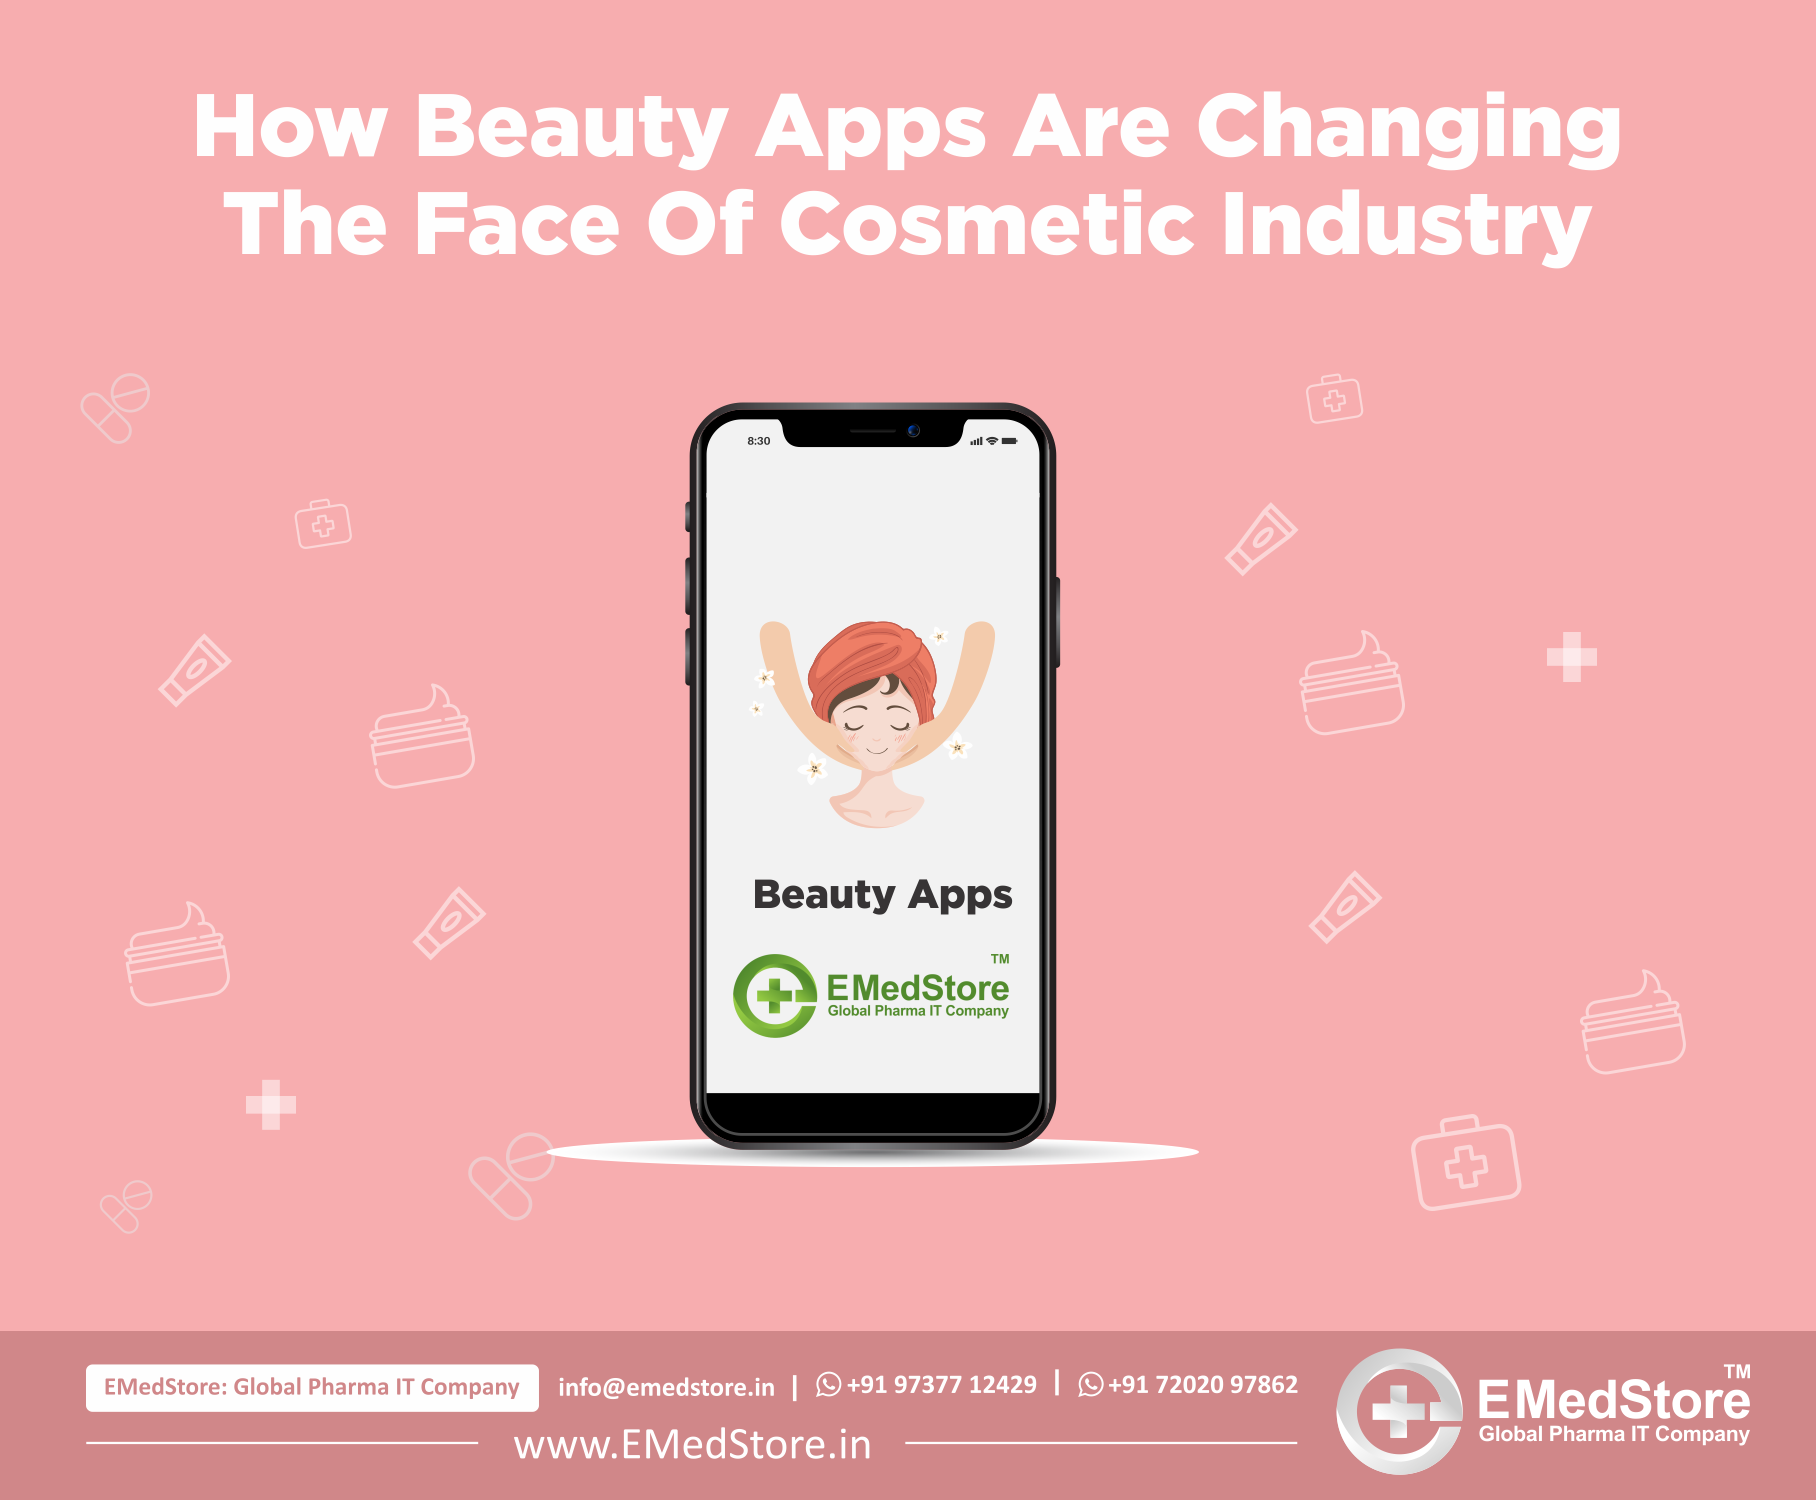 How Beauty Apps Are Changing The Face Of Cosmetic Industry